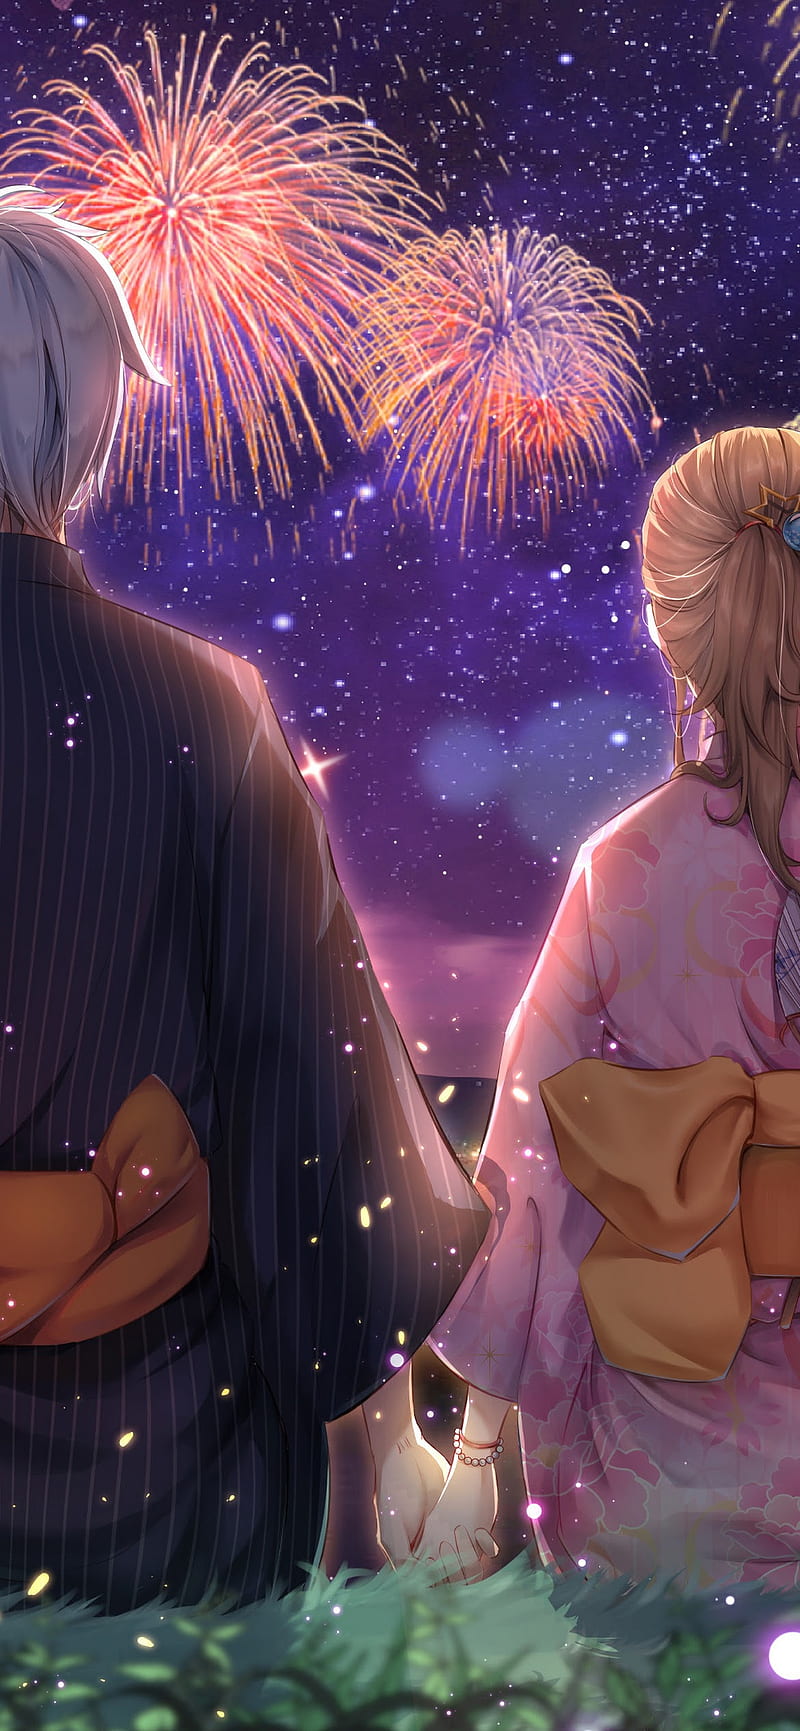 10 Best Romance Anime With Fireworks That Moved Us To Tears